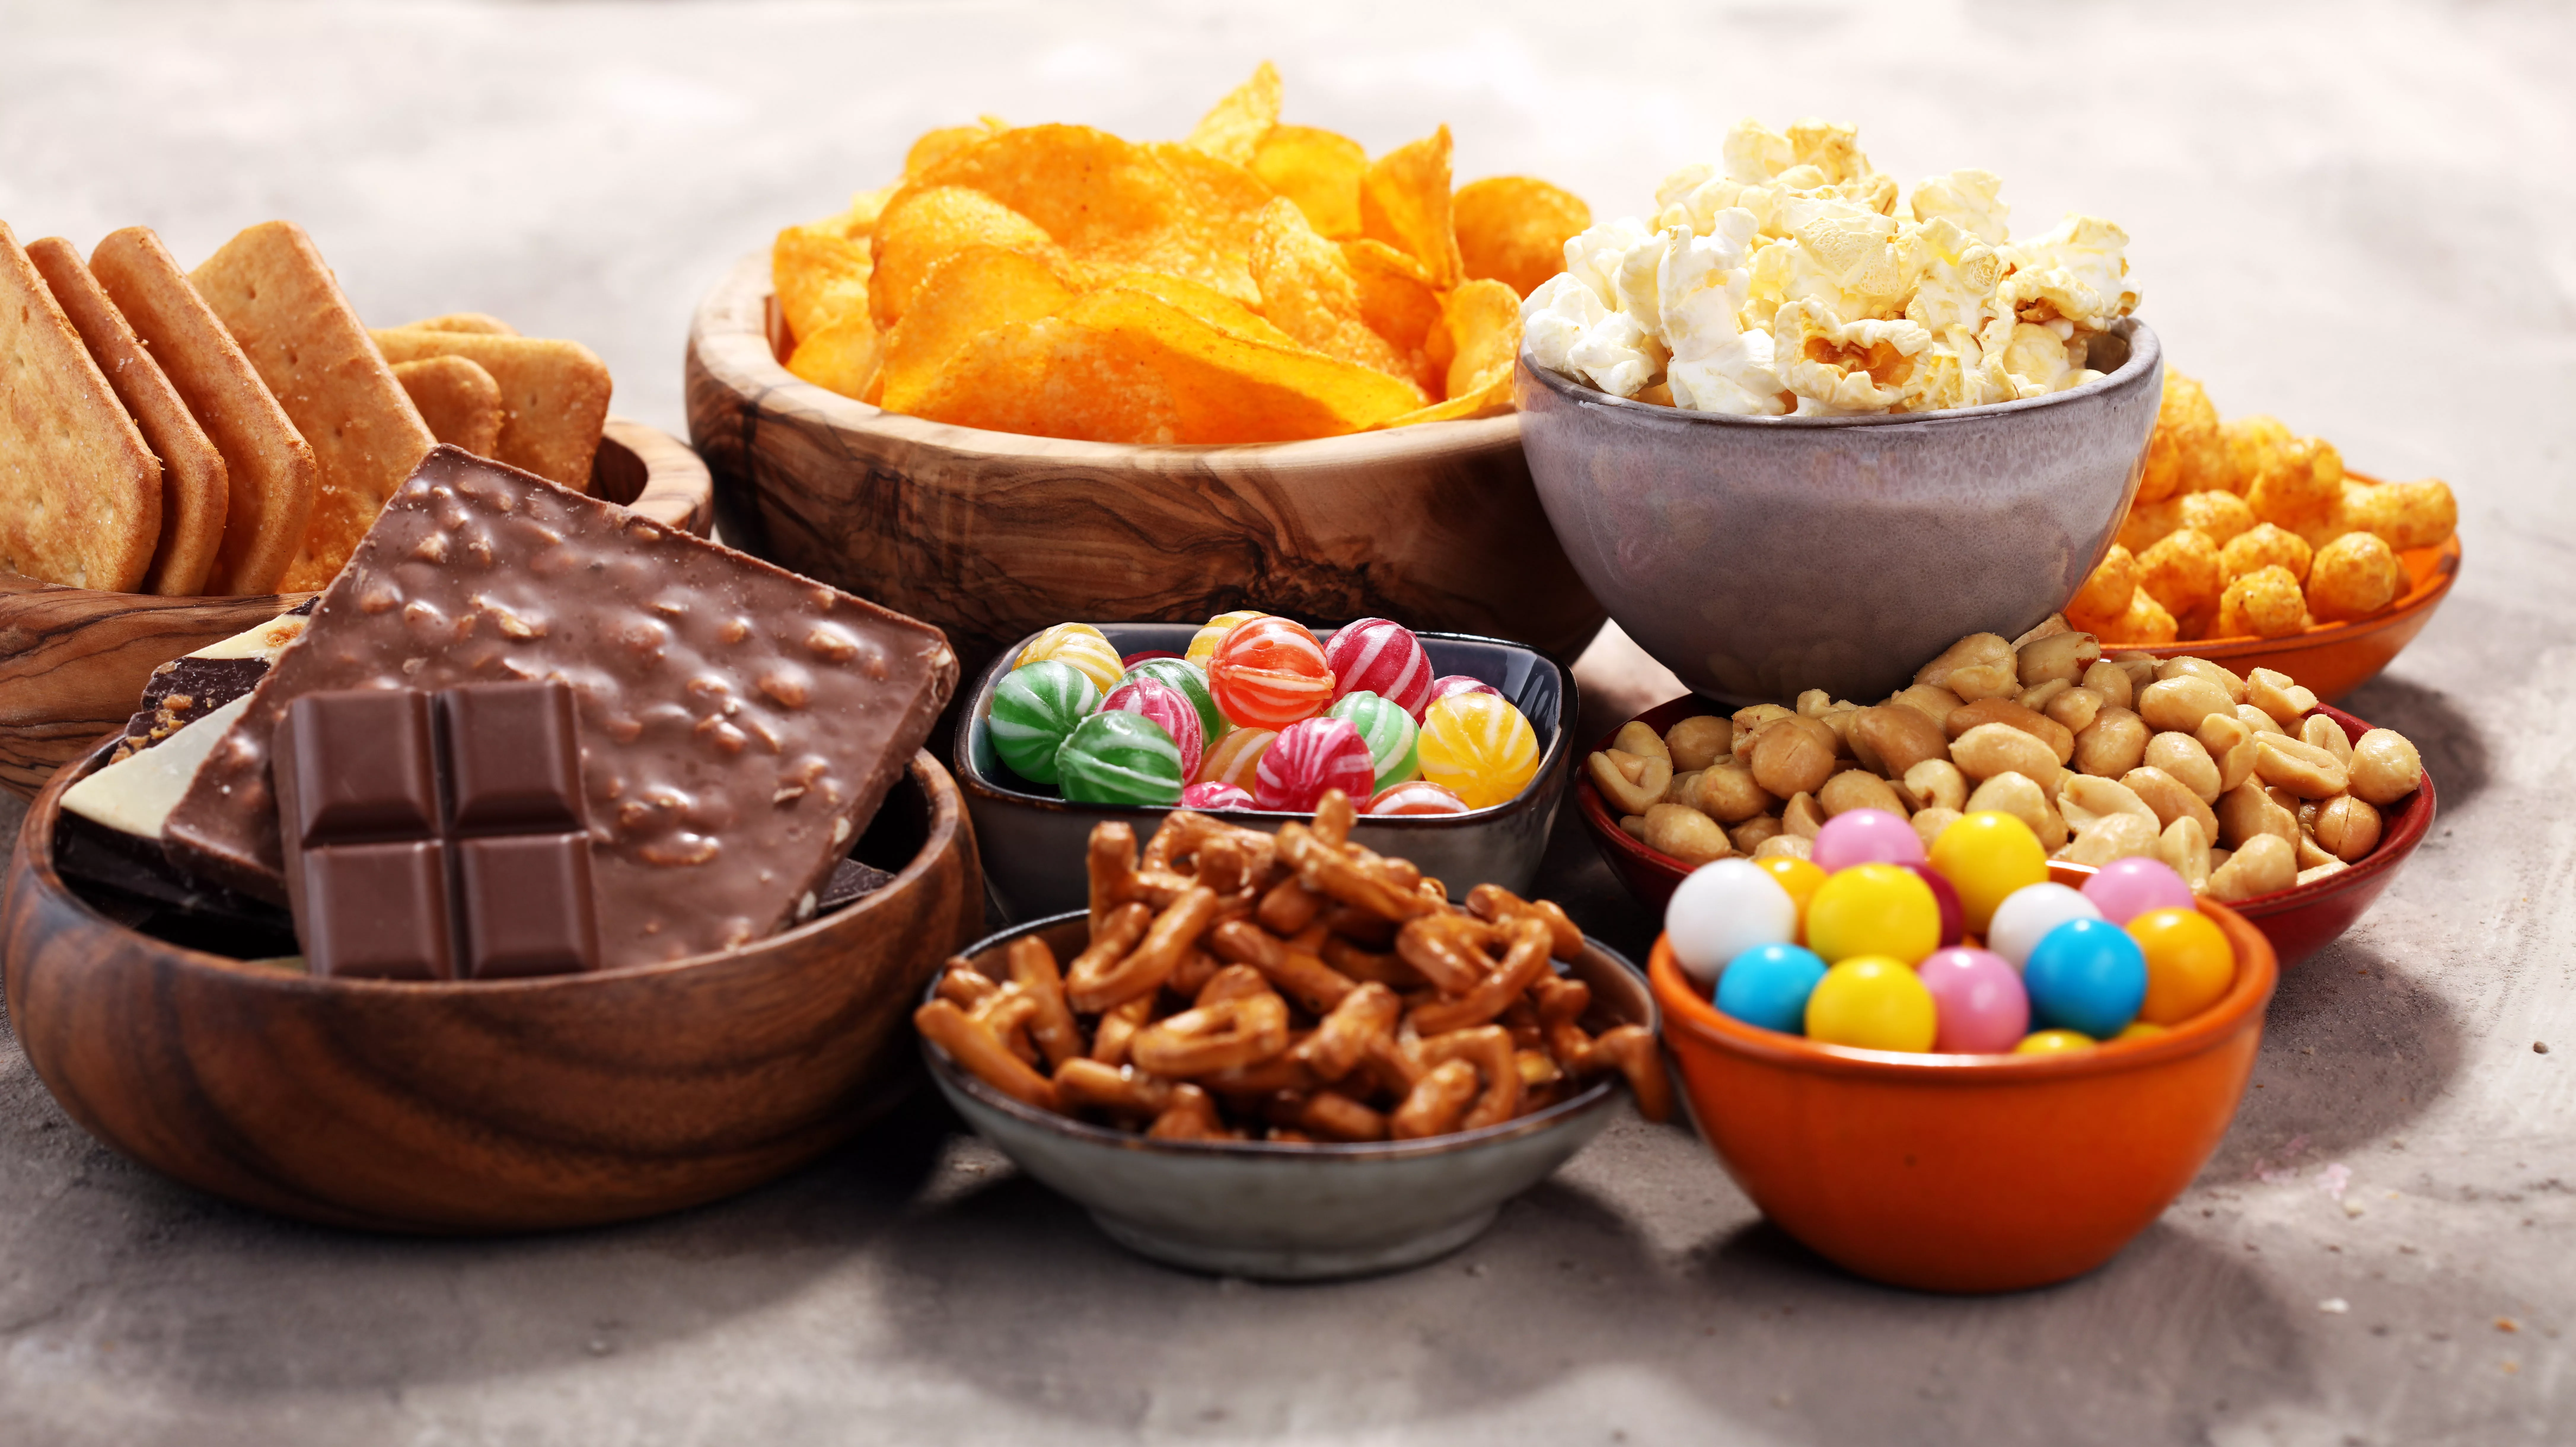 Salty snacks. Pretzels, chips, crackers in wooden bowls. Unhealthy products. food bad for figure, skin, heart and teeth. Assortment of fast carbohydrates food.